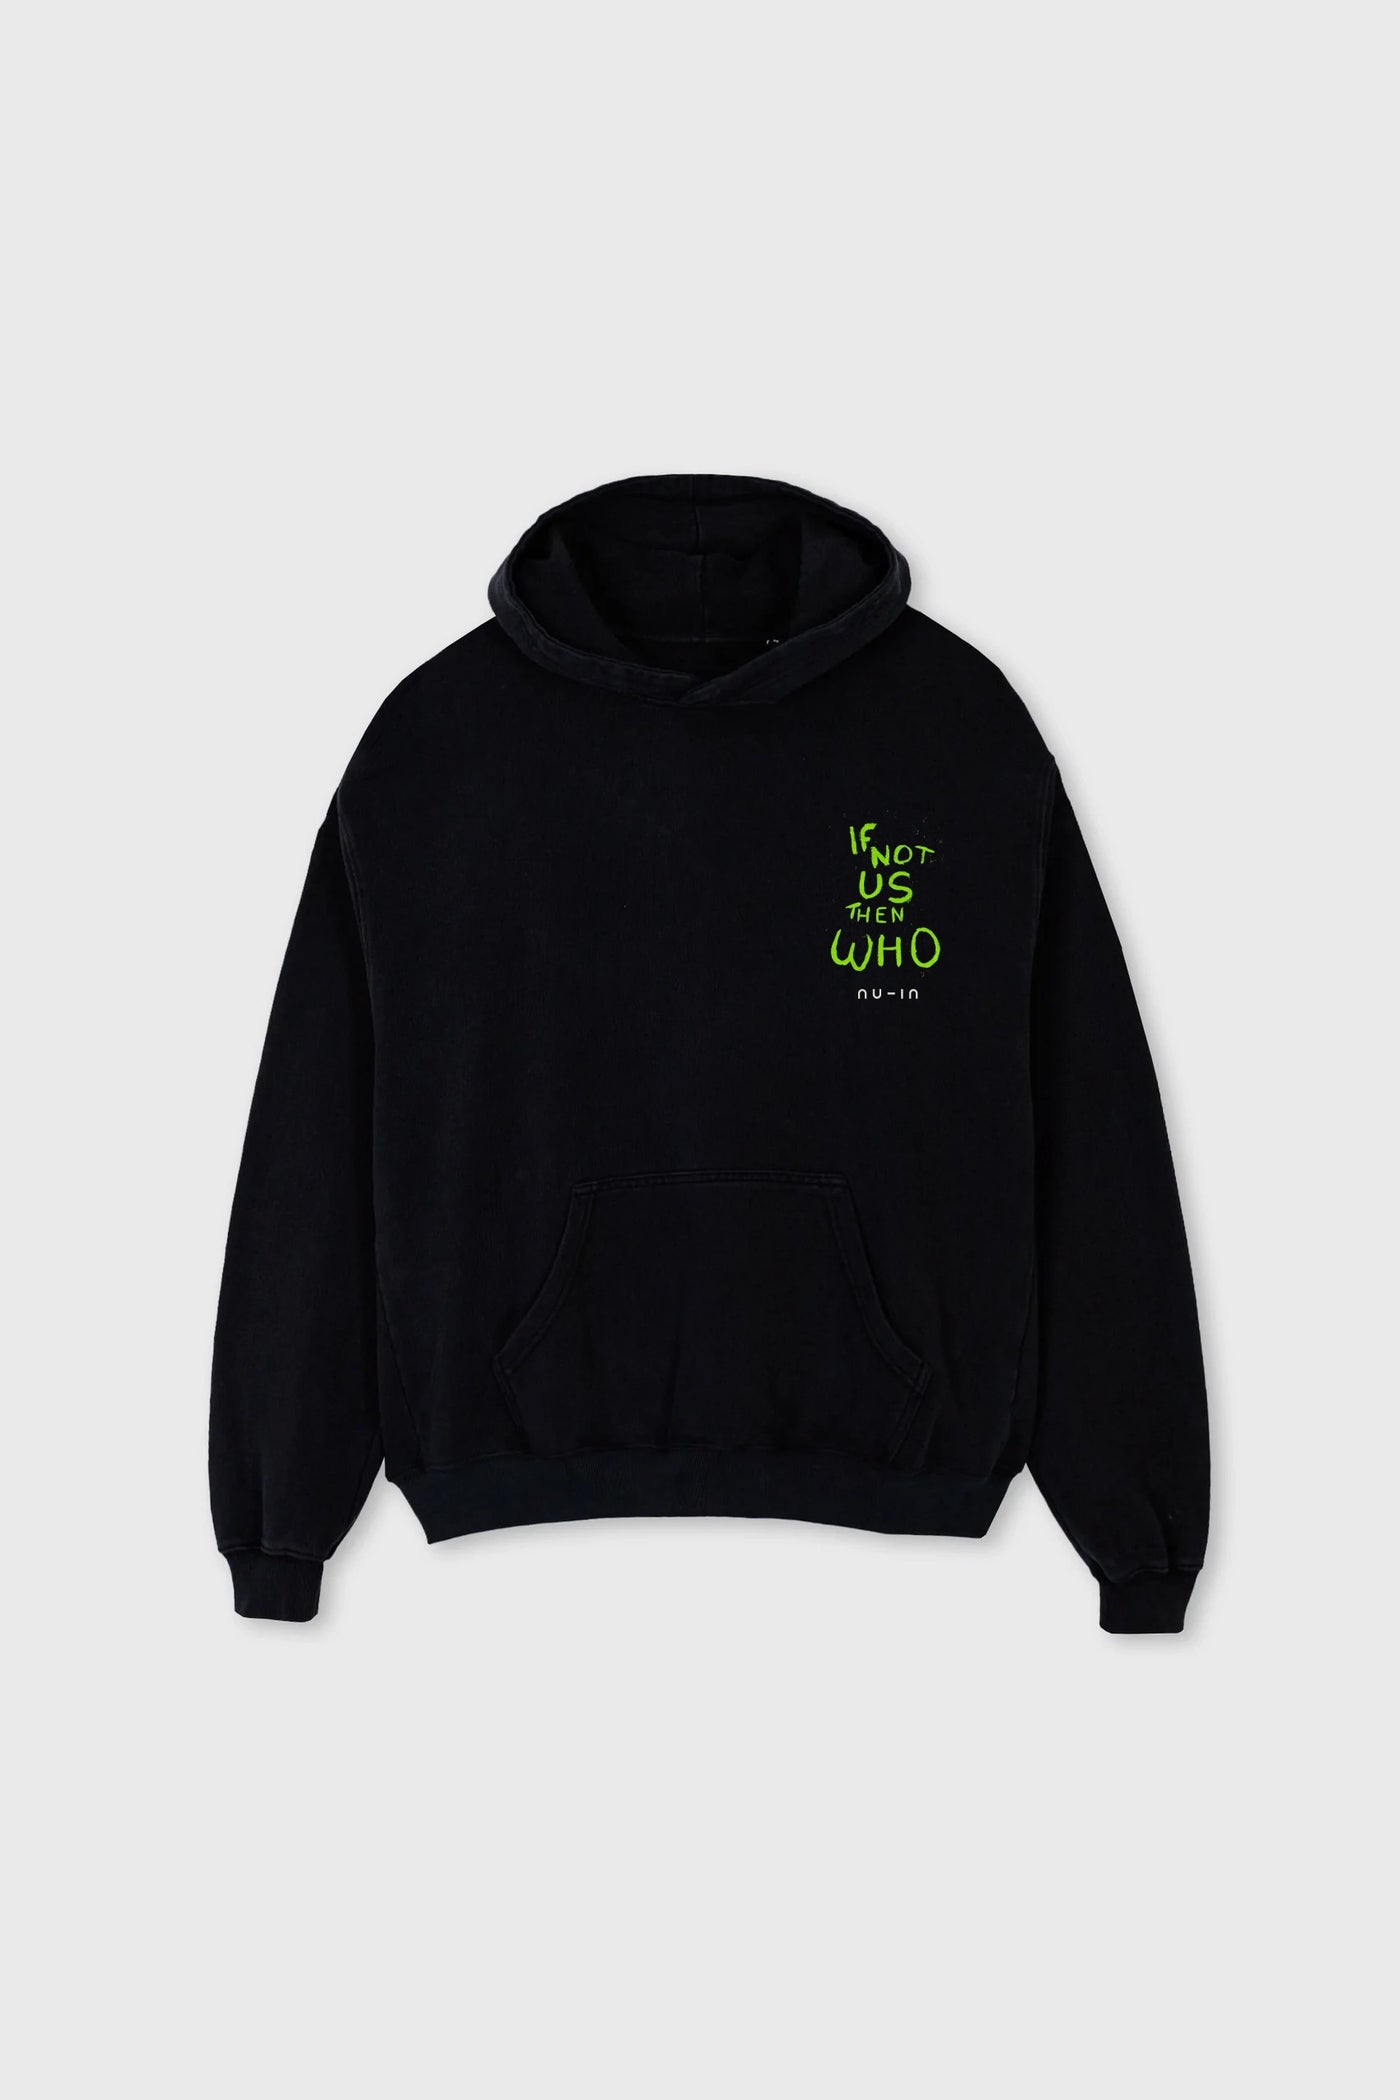 Listen To The Science Super Oversized Hoodie